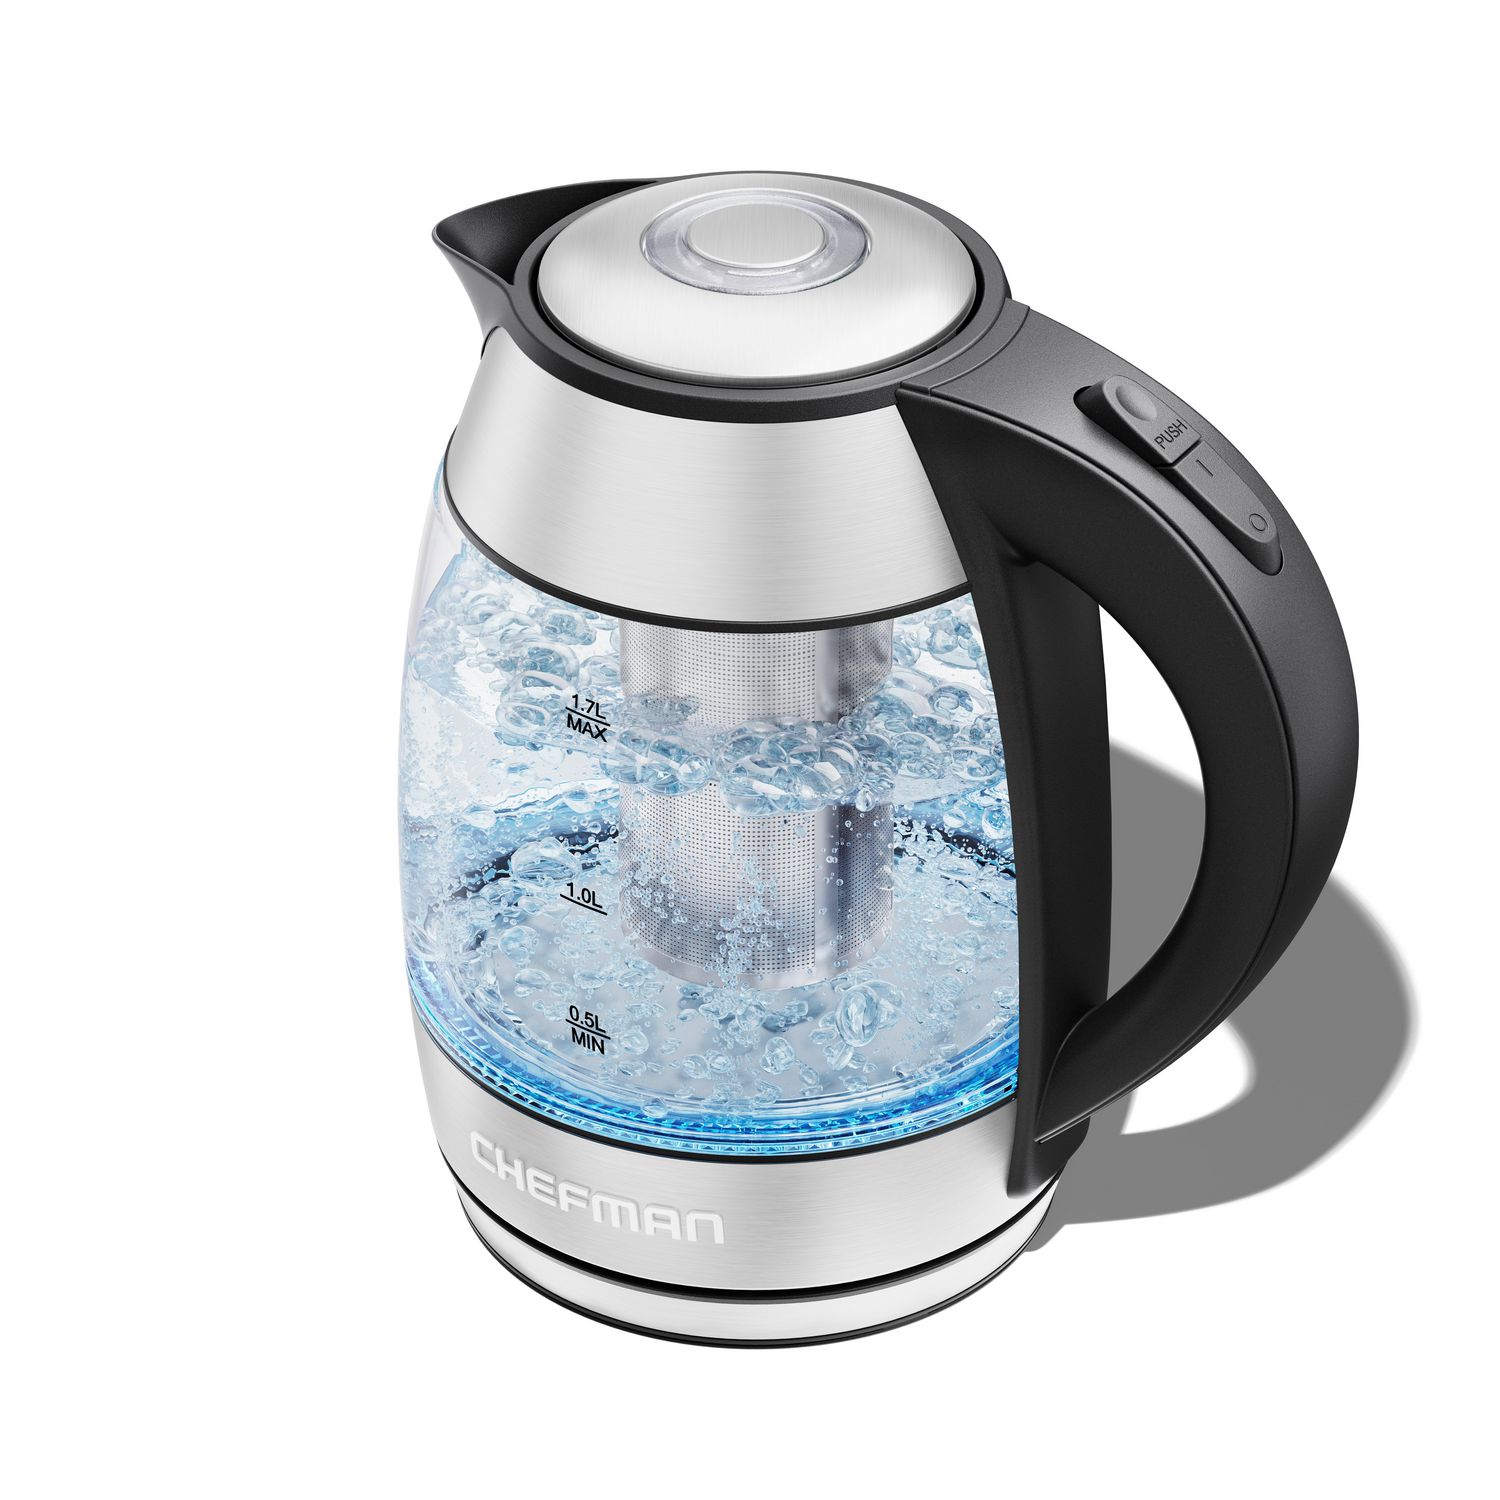 Electric Kettle with Glas,1.8L 110V 1100W Electric Kettle Stainless Steel Borosilicate Glass Blue Light